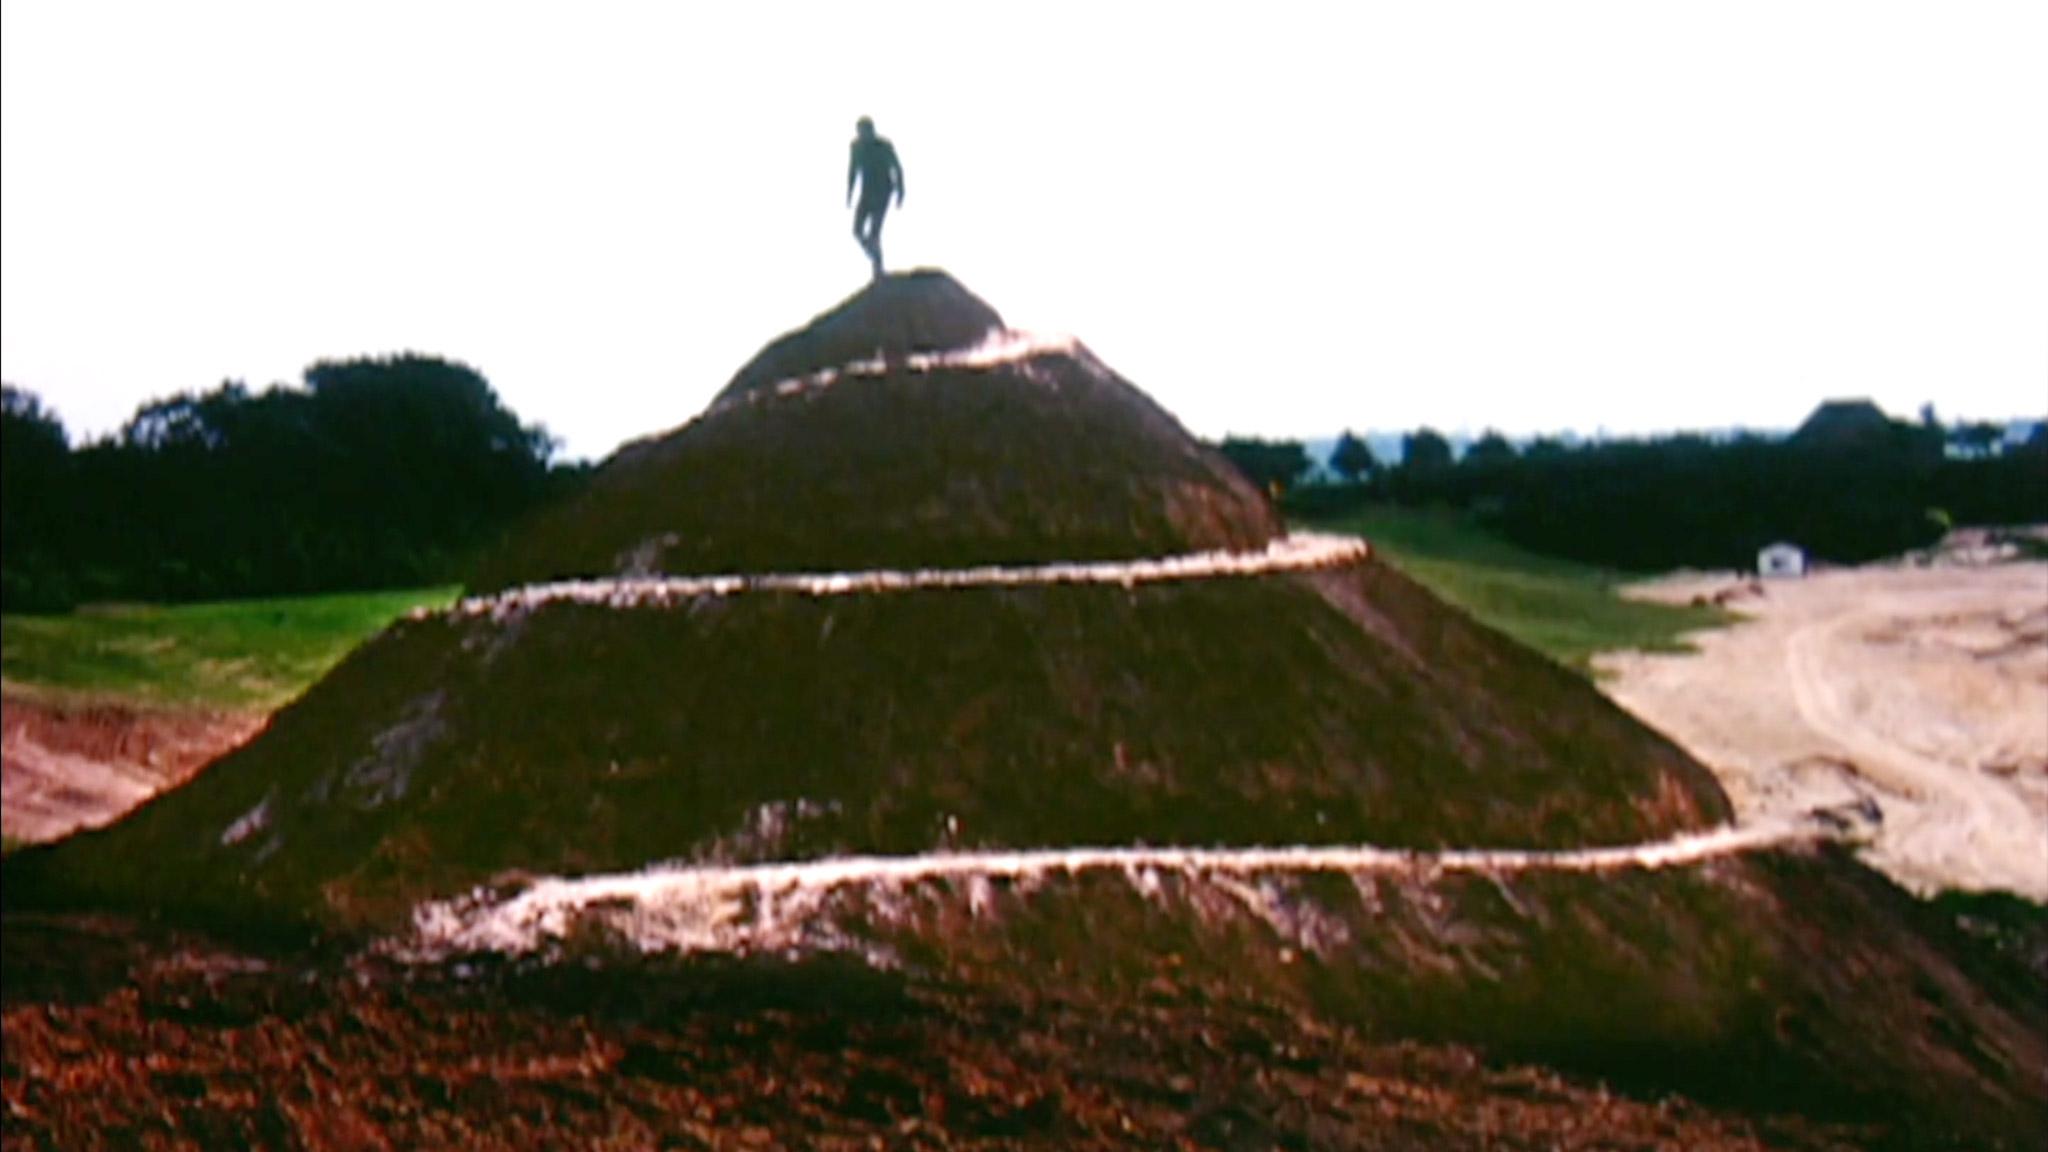 a man running down a white spiral path on a small hill